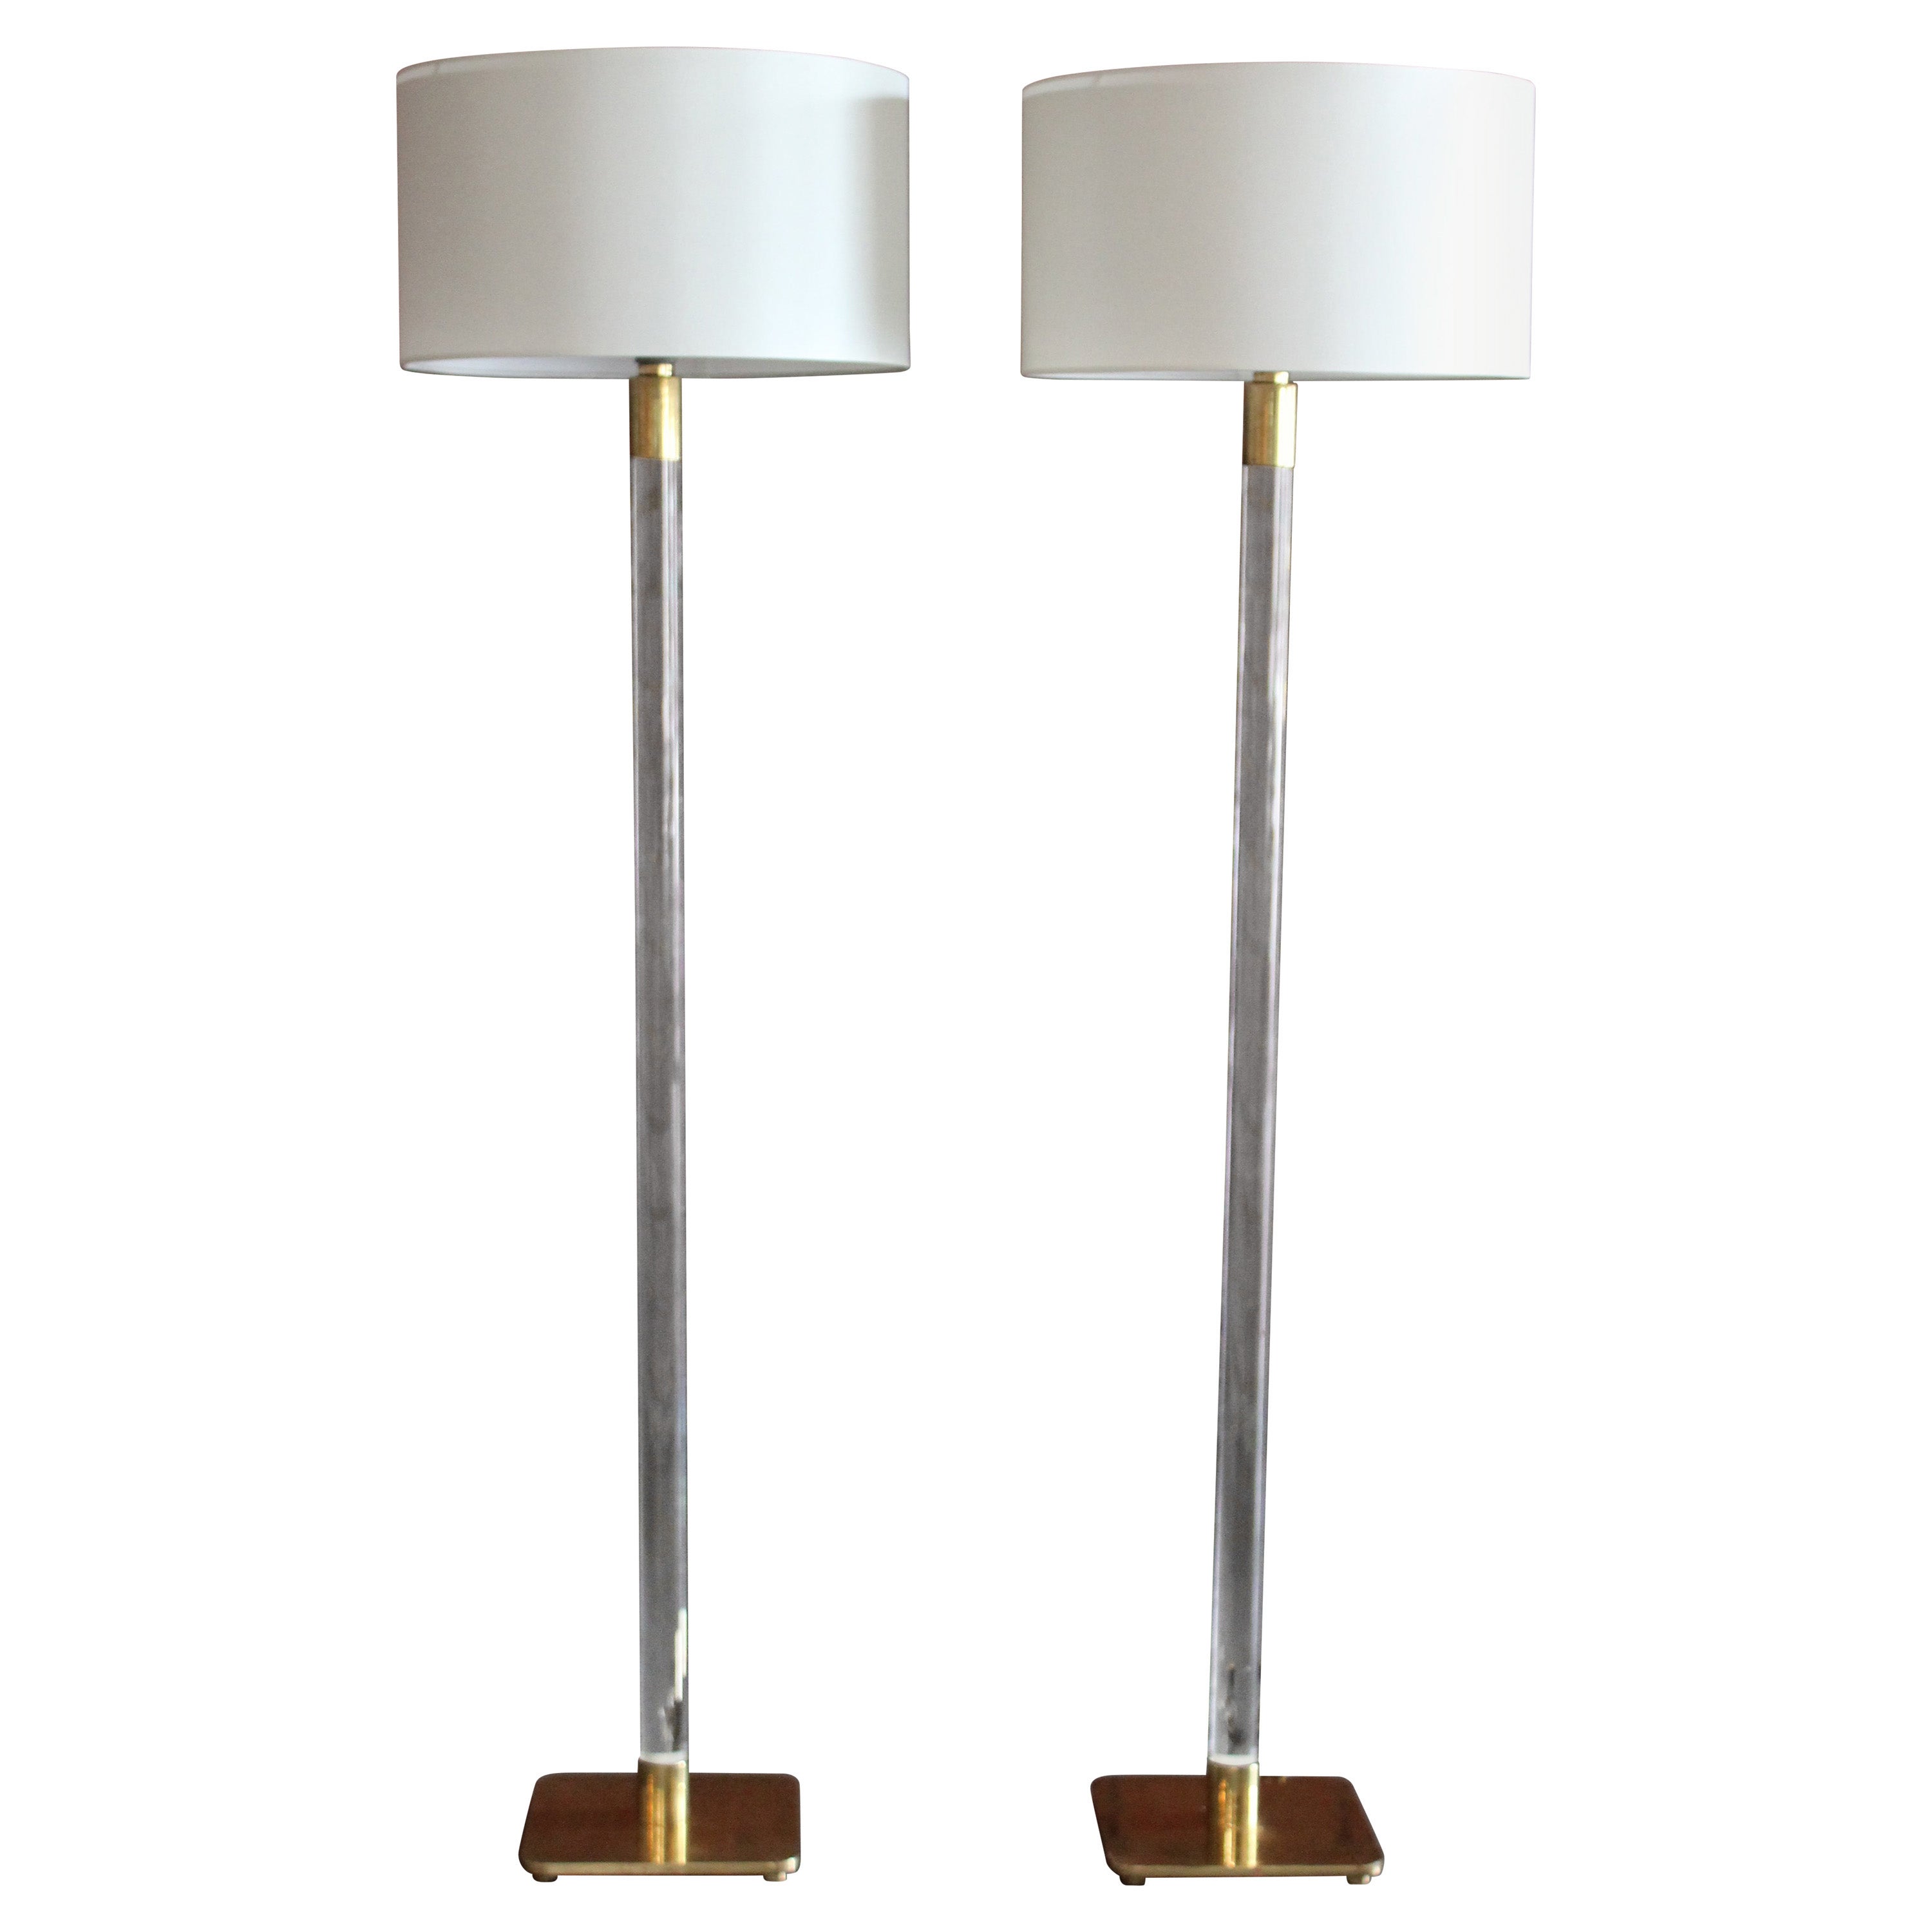 Pair of Glass & Brass Floor Lamps by Hansen, NYC, 1970s